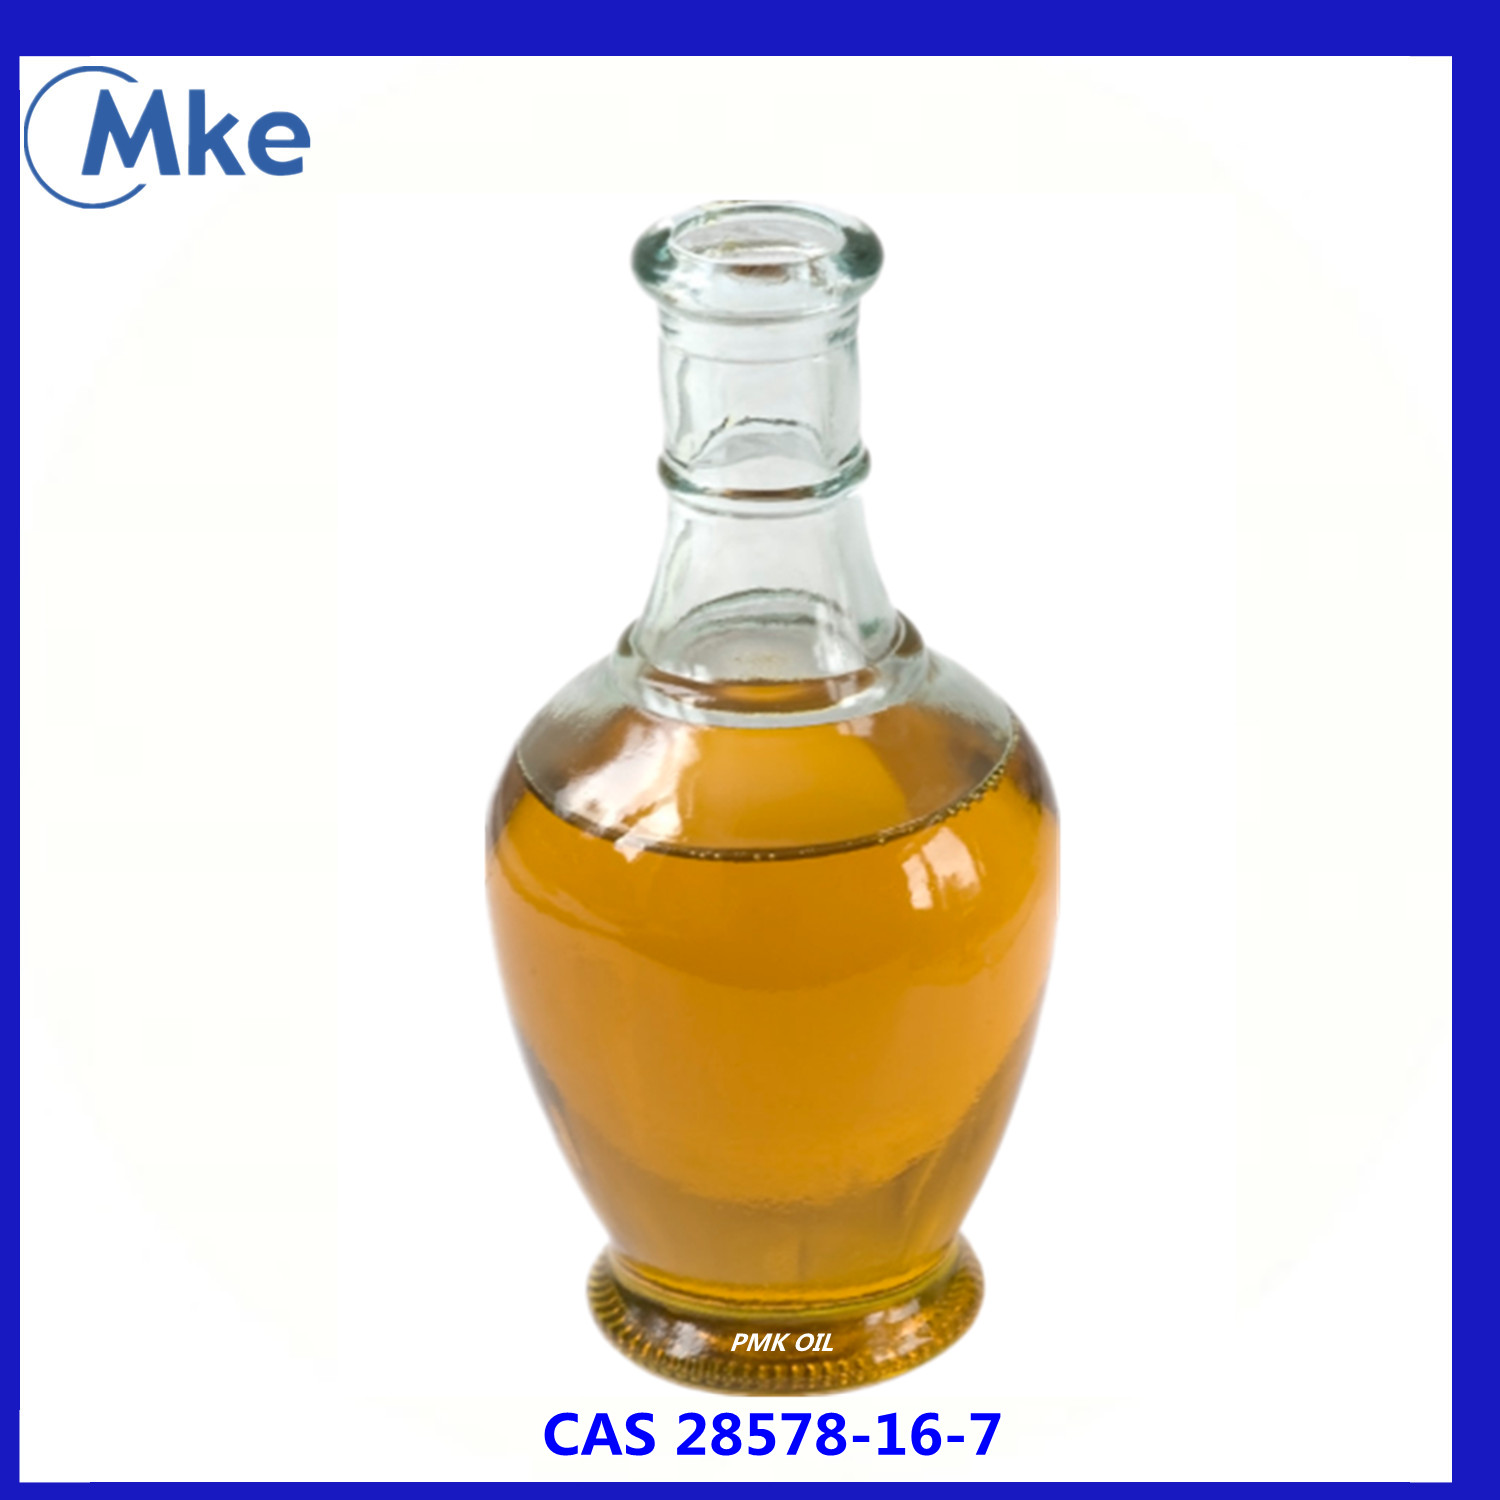 0.85 yield rate New pmk oil pmk glycidate cas 28578-16-7 safe shipping to NL, Canada